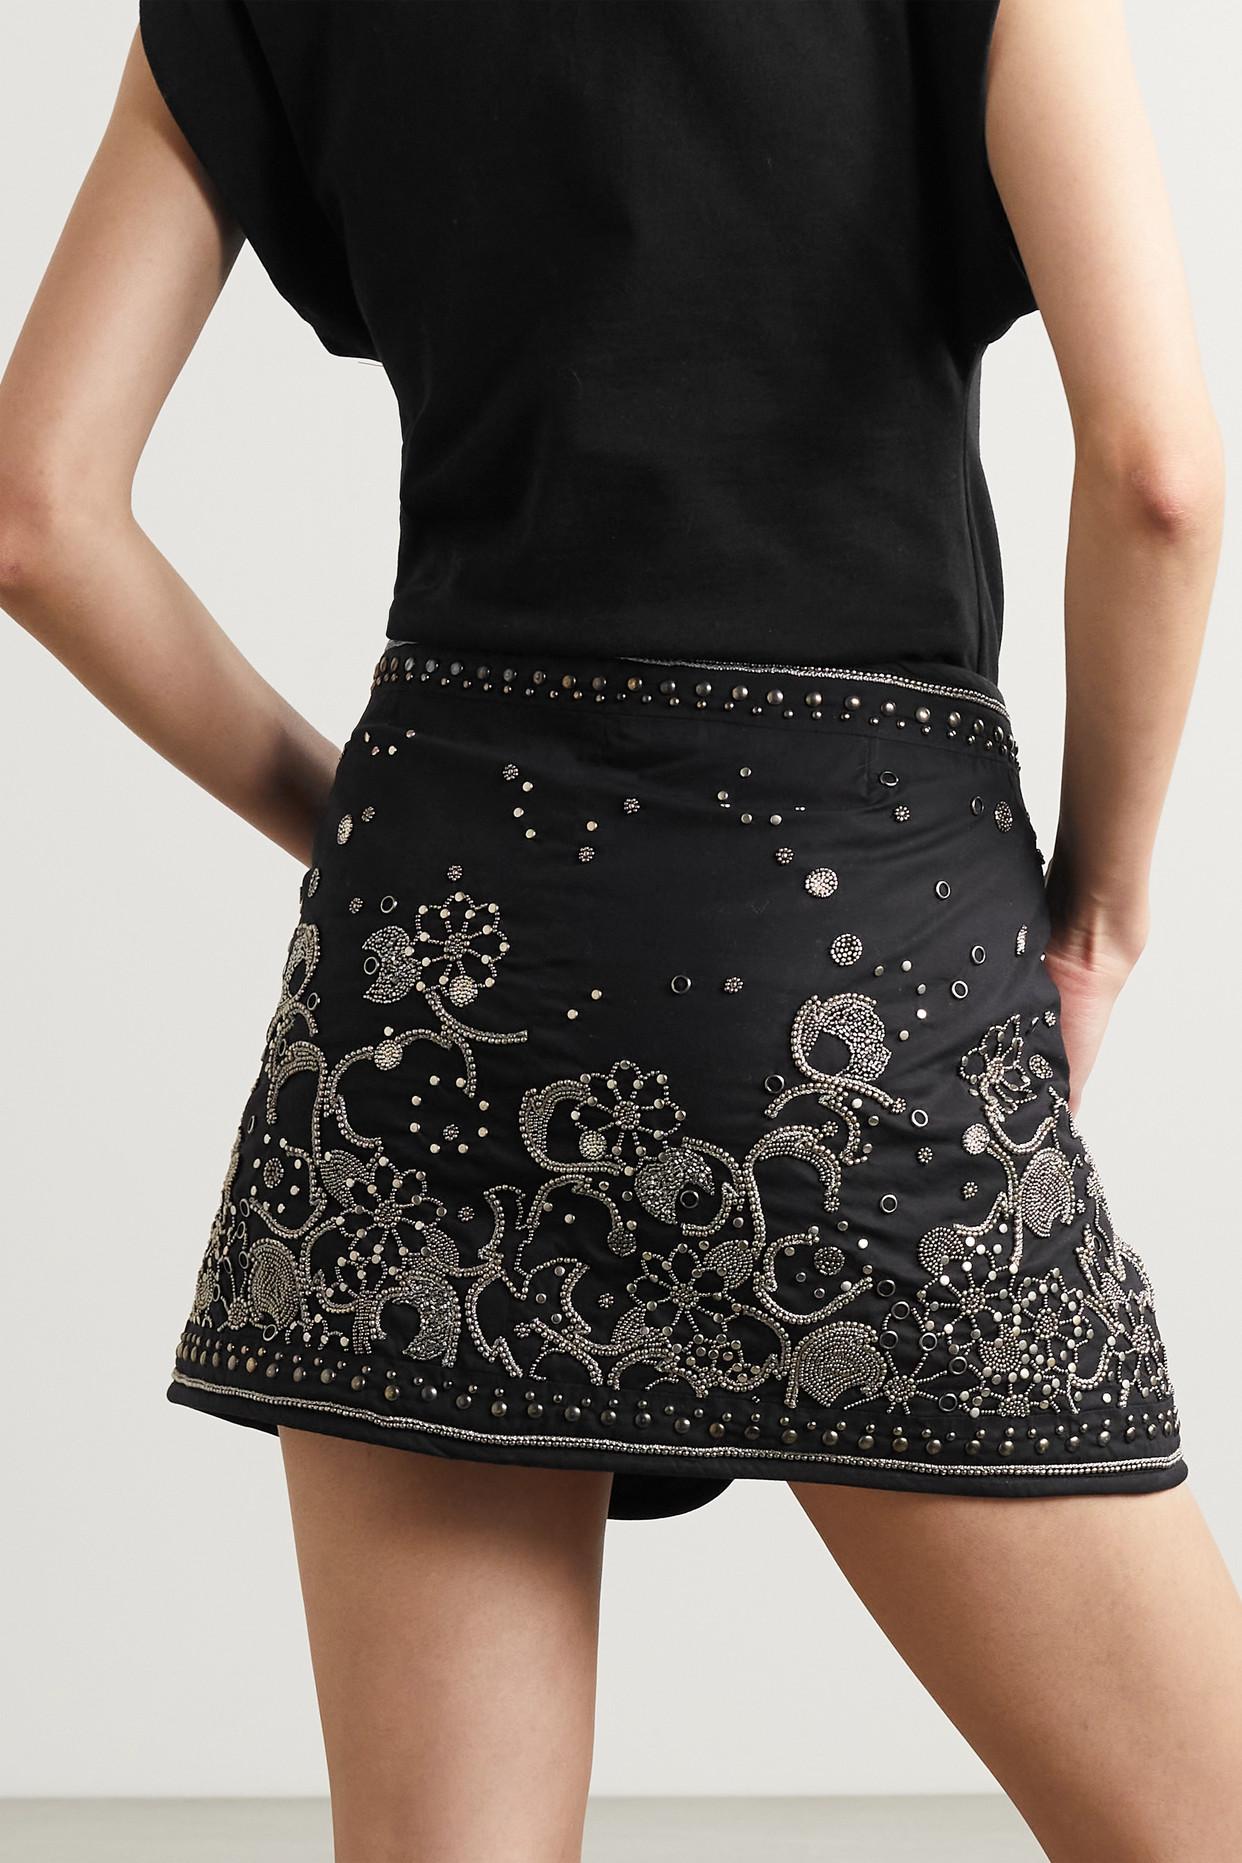 Isabel Marant Blanca Embroidered Embellished Cotton Mini Skirt in Black |  Lyst